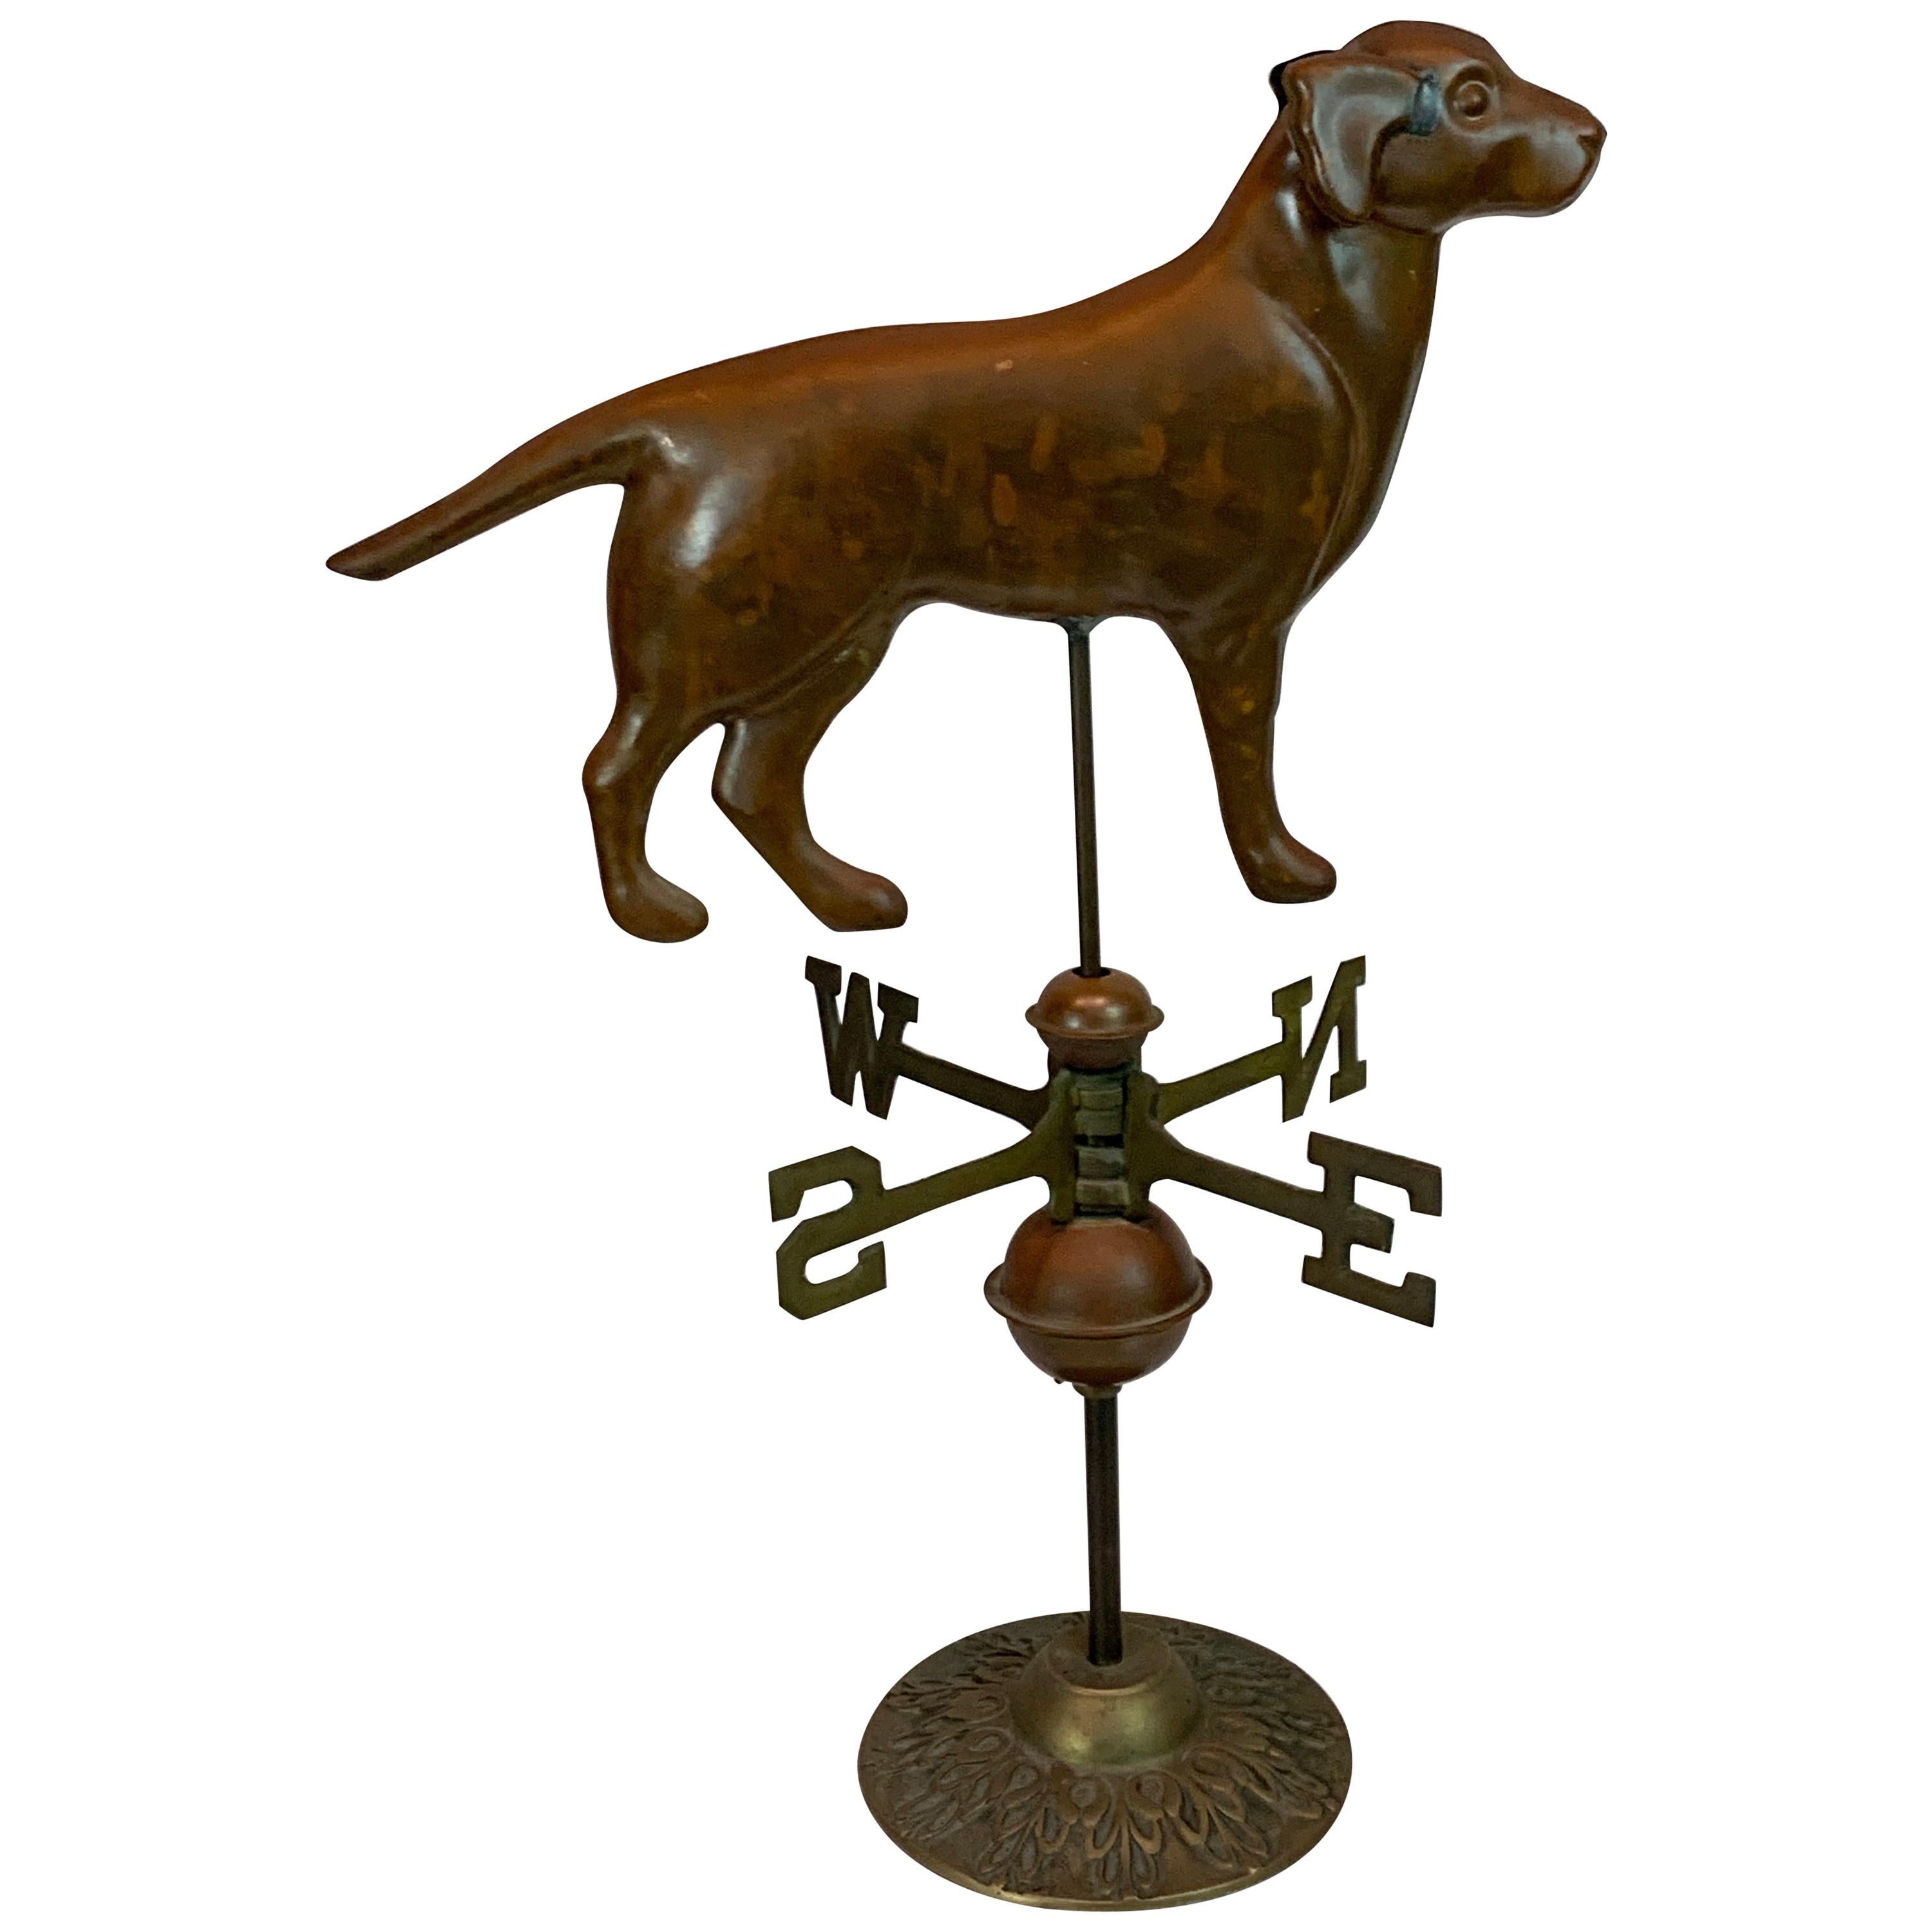 Vintage Copper and Brass Table Top Model of a Weathervane